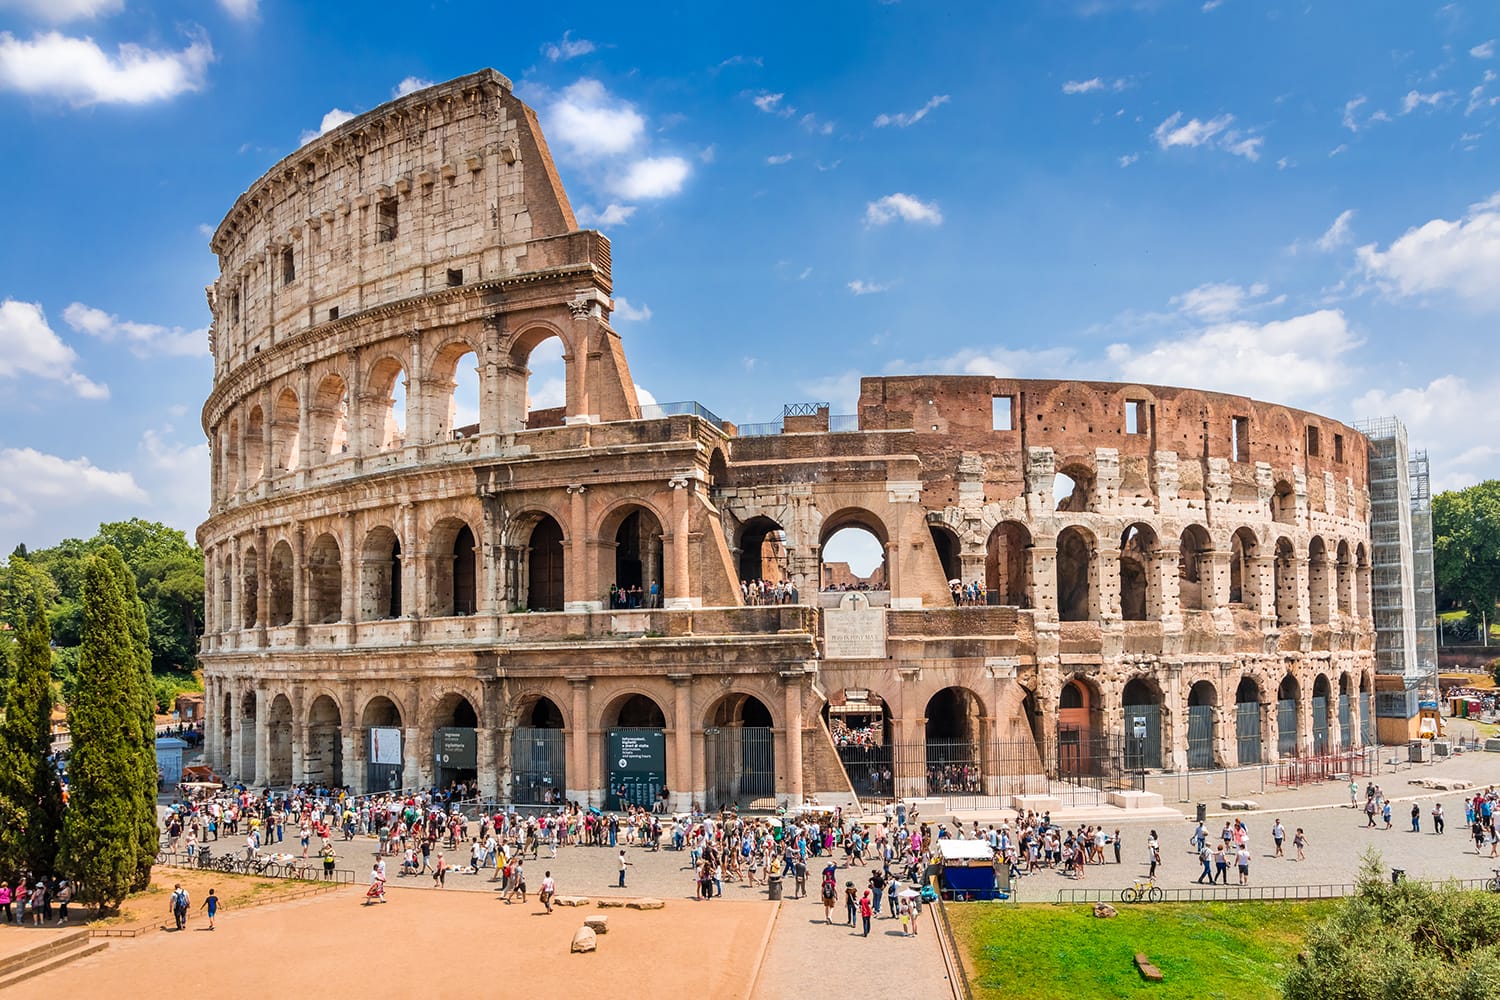 Colosseum with clear blue sky and clouds, Rome,Italy. Rome architecture and landmark. Rome Colosseum is one of the best known monuments of Rome and Italy